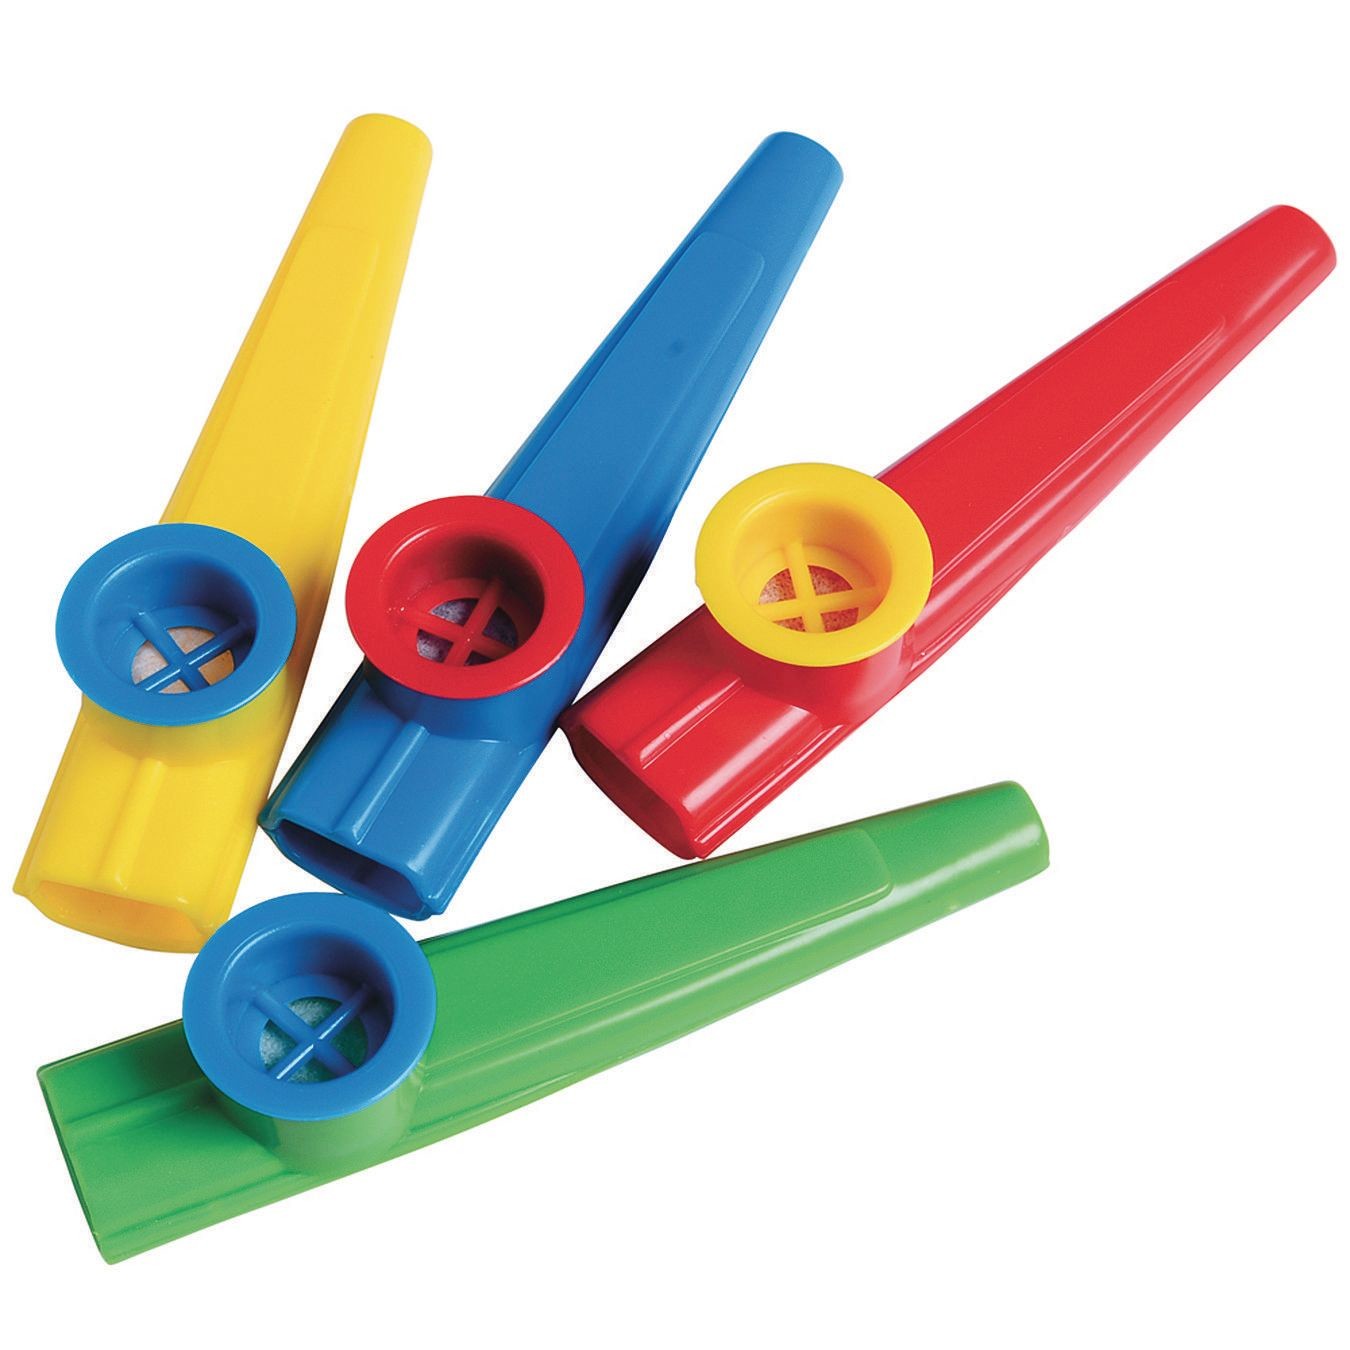 Plastic Kazoos Musical Instruments Kazoo Instrument Kazoo Flute Colored  Kazoos Suitable For Music Lovers And Gifts (5pcs, Random Color)